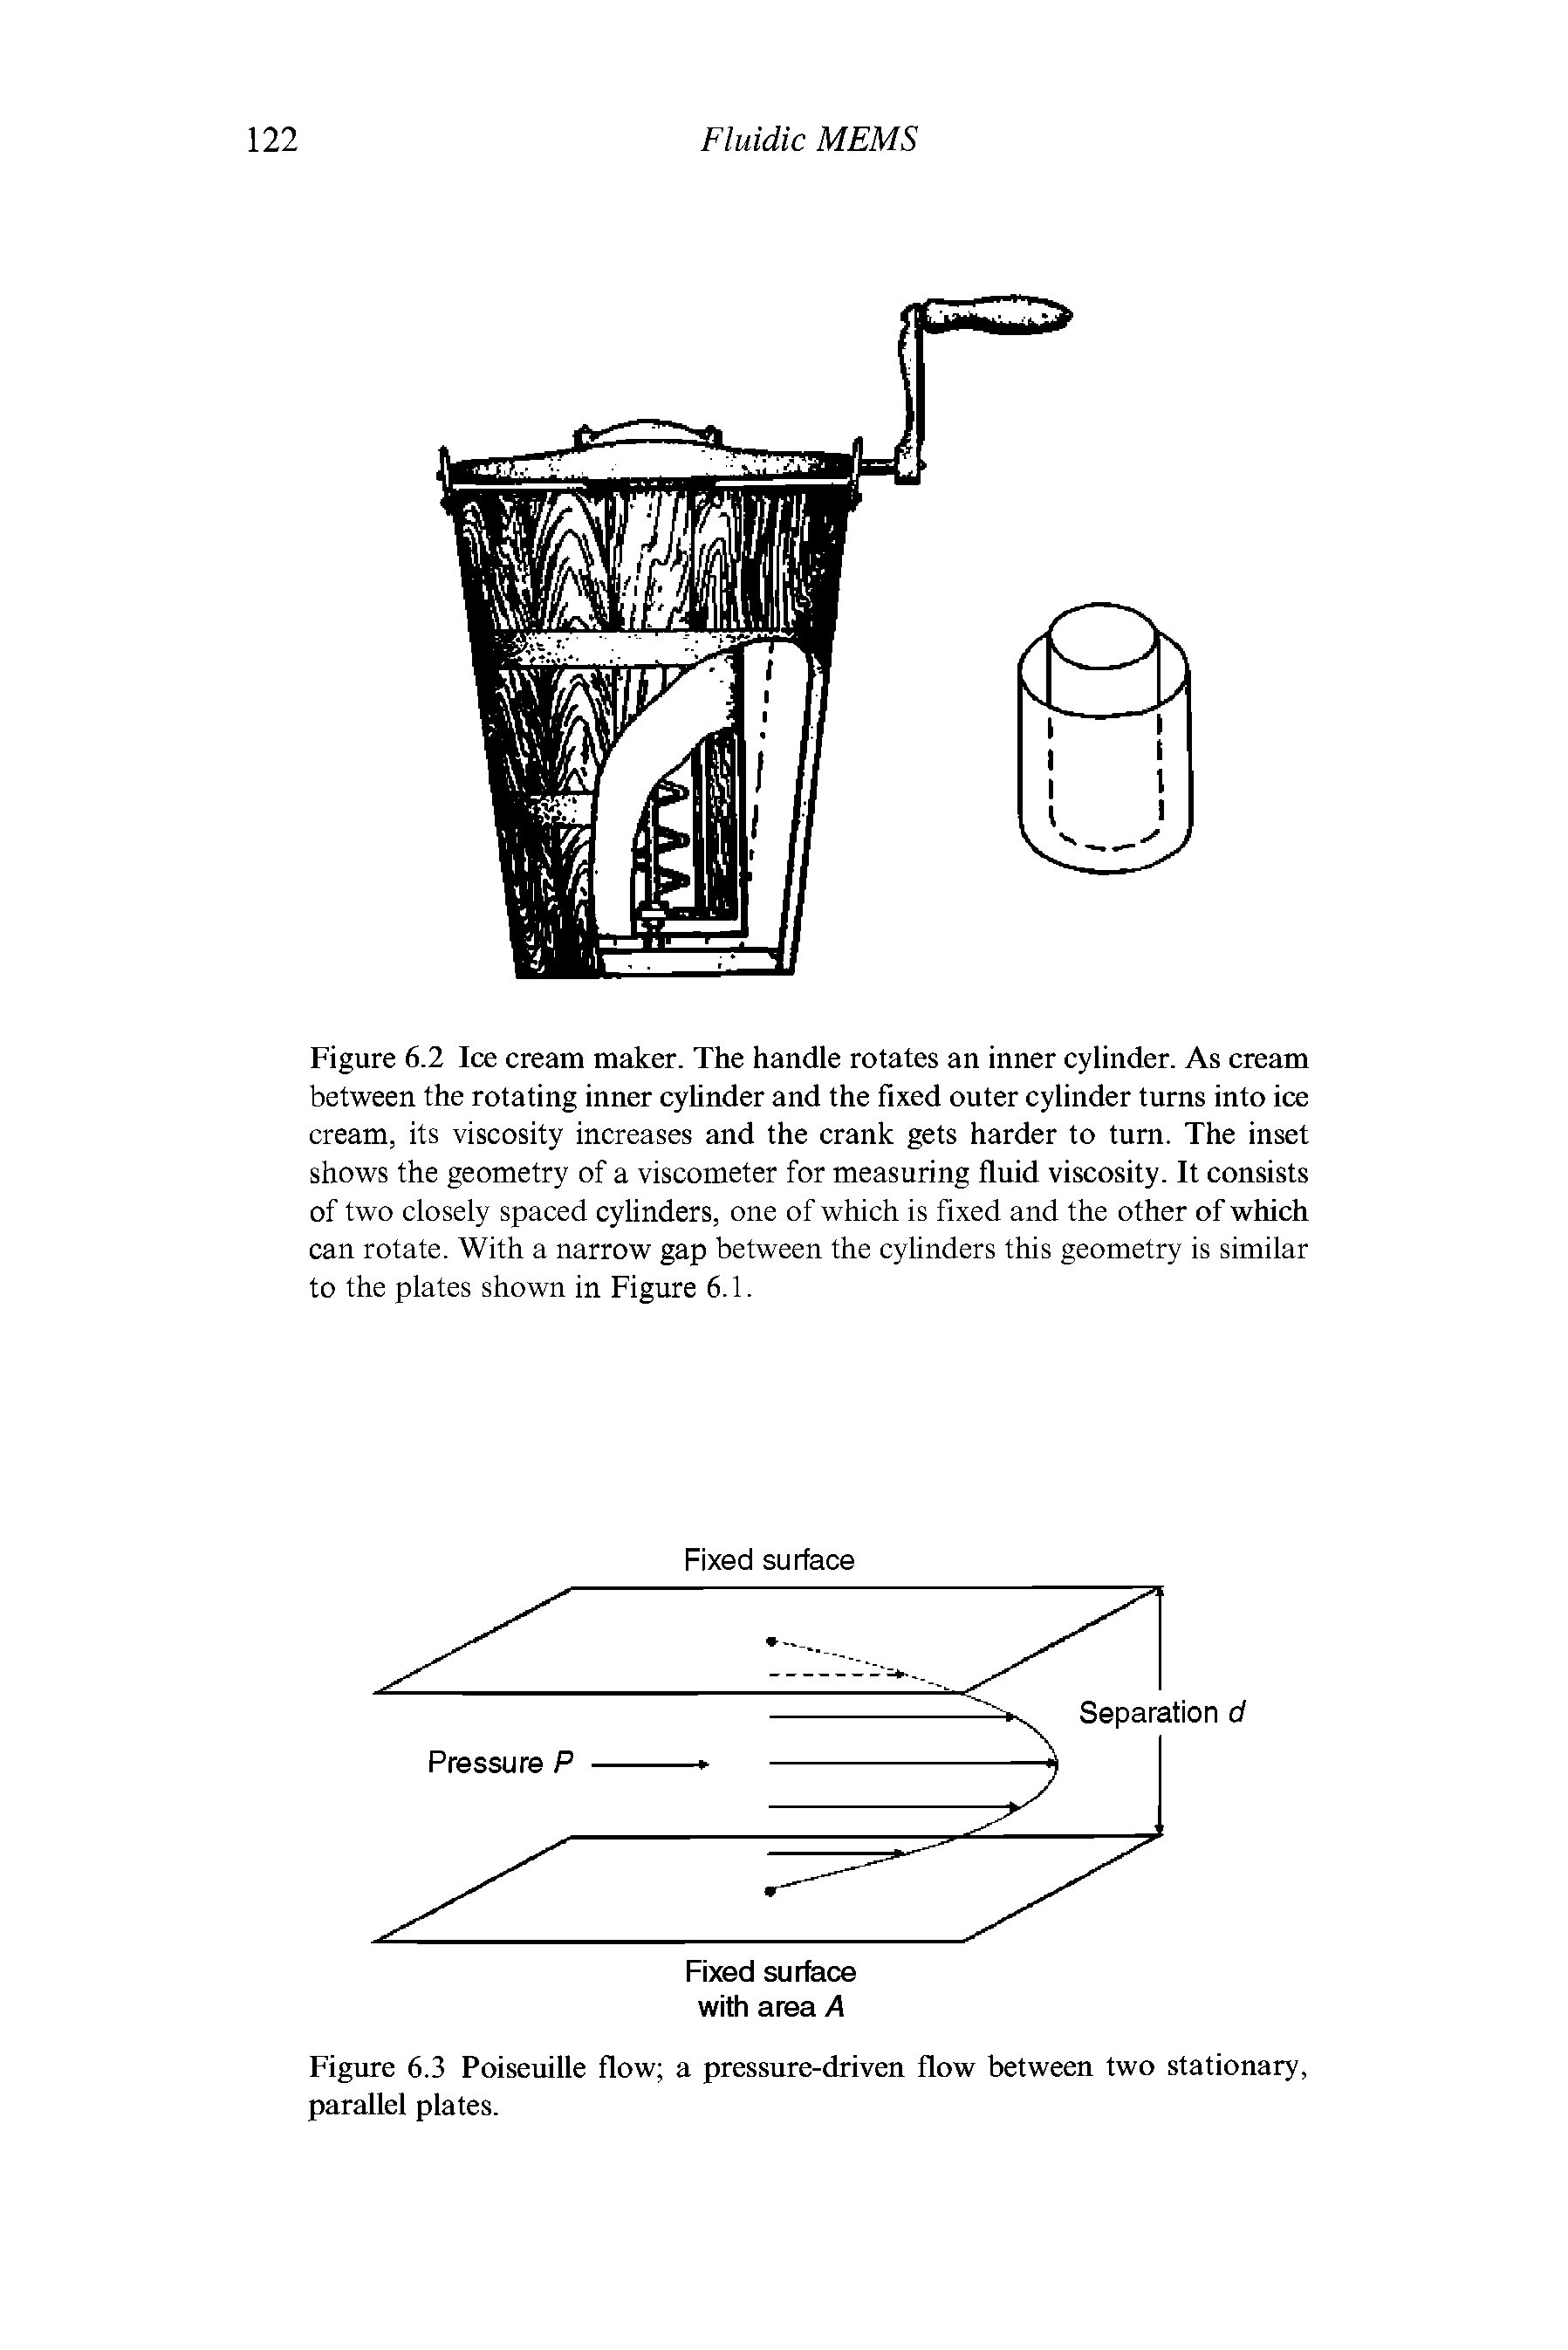 Figure 6.2 Ice cream maker. The handle rotates an inner cylinder. As cream between the rotating inner cyhnder and the fixed outer cylinder turns into ice cream, its viscosity increases and the crank gets harder to turn. The inset shows the geometry of a viscometer for measuring fluid viscosity. It consists of two closely spaced cylinders, one of which is fixed and the other of which can rotate. With a narrow gap between the cylinders this geometry is similar to the plates shown in Figure 6.1.